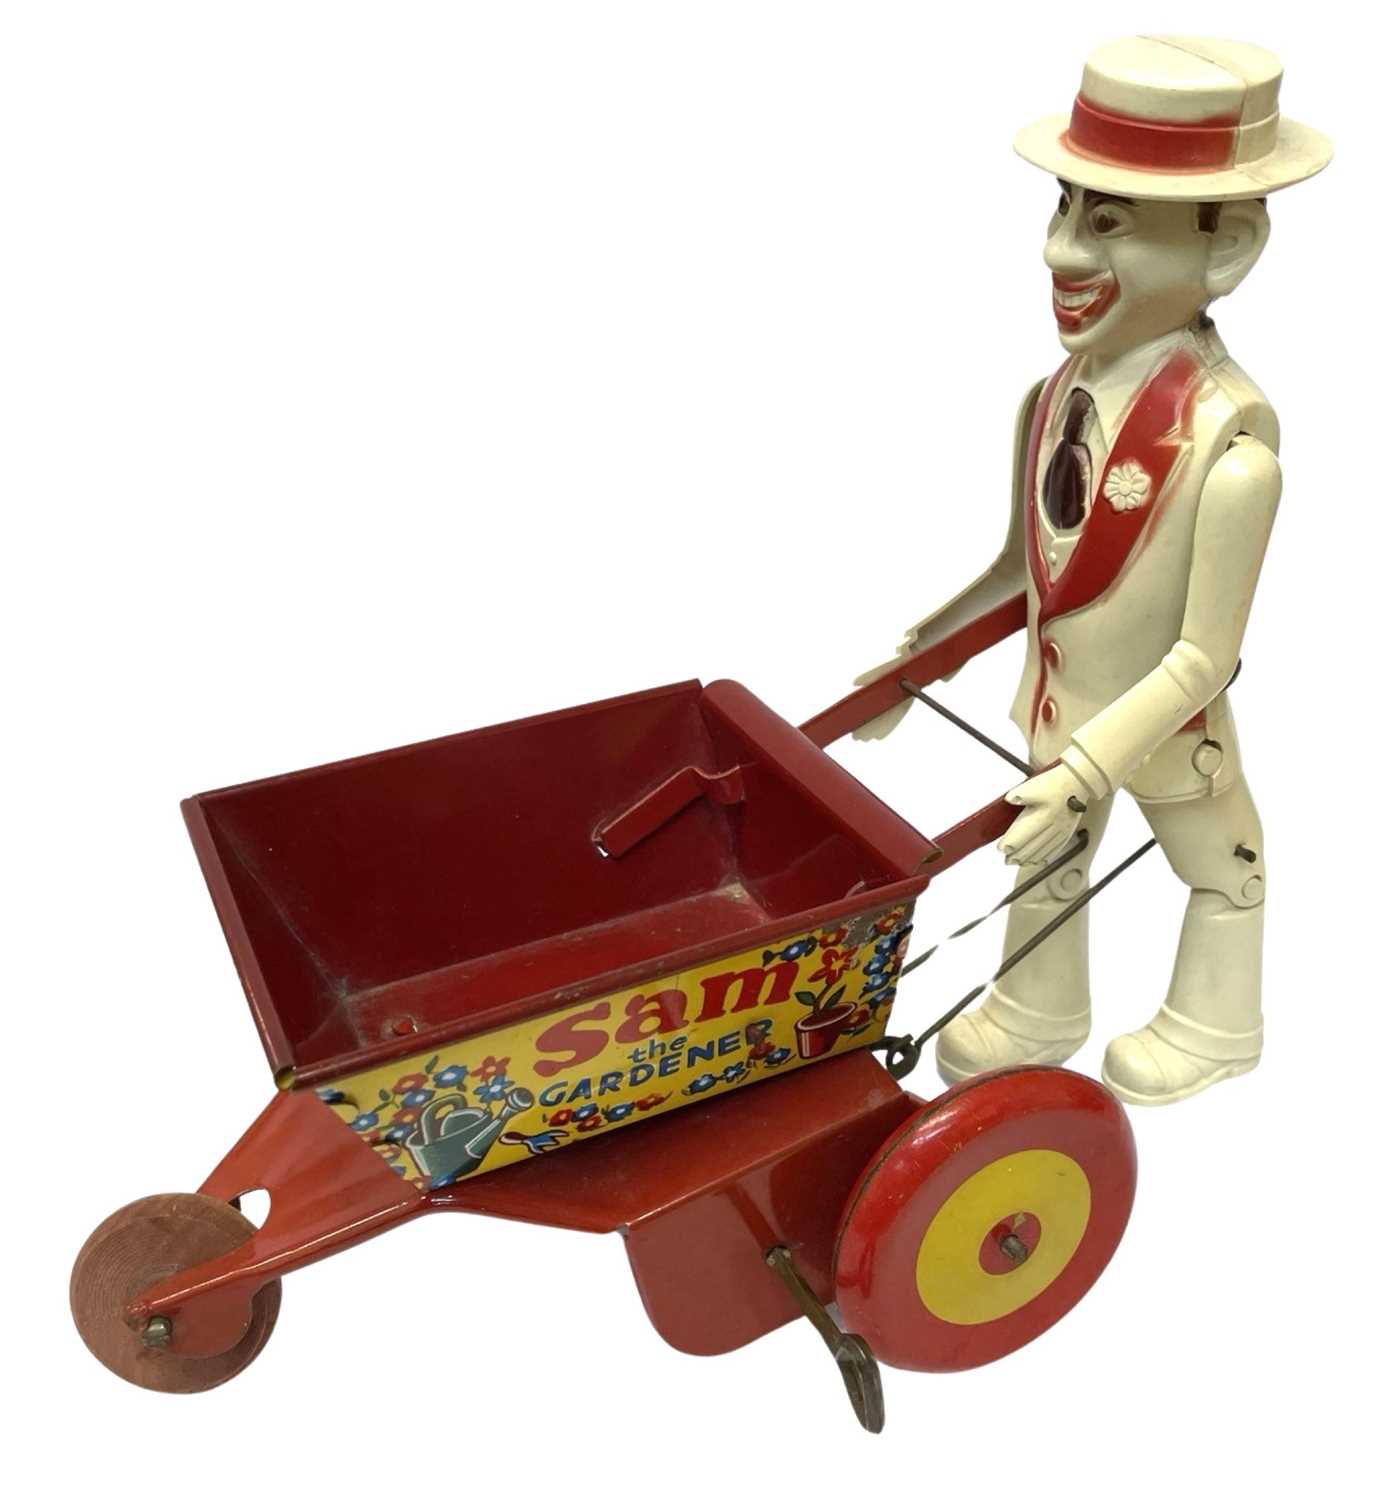 A tinplate and plastic Sam the Gardener clockwork toy by MARX